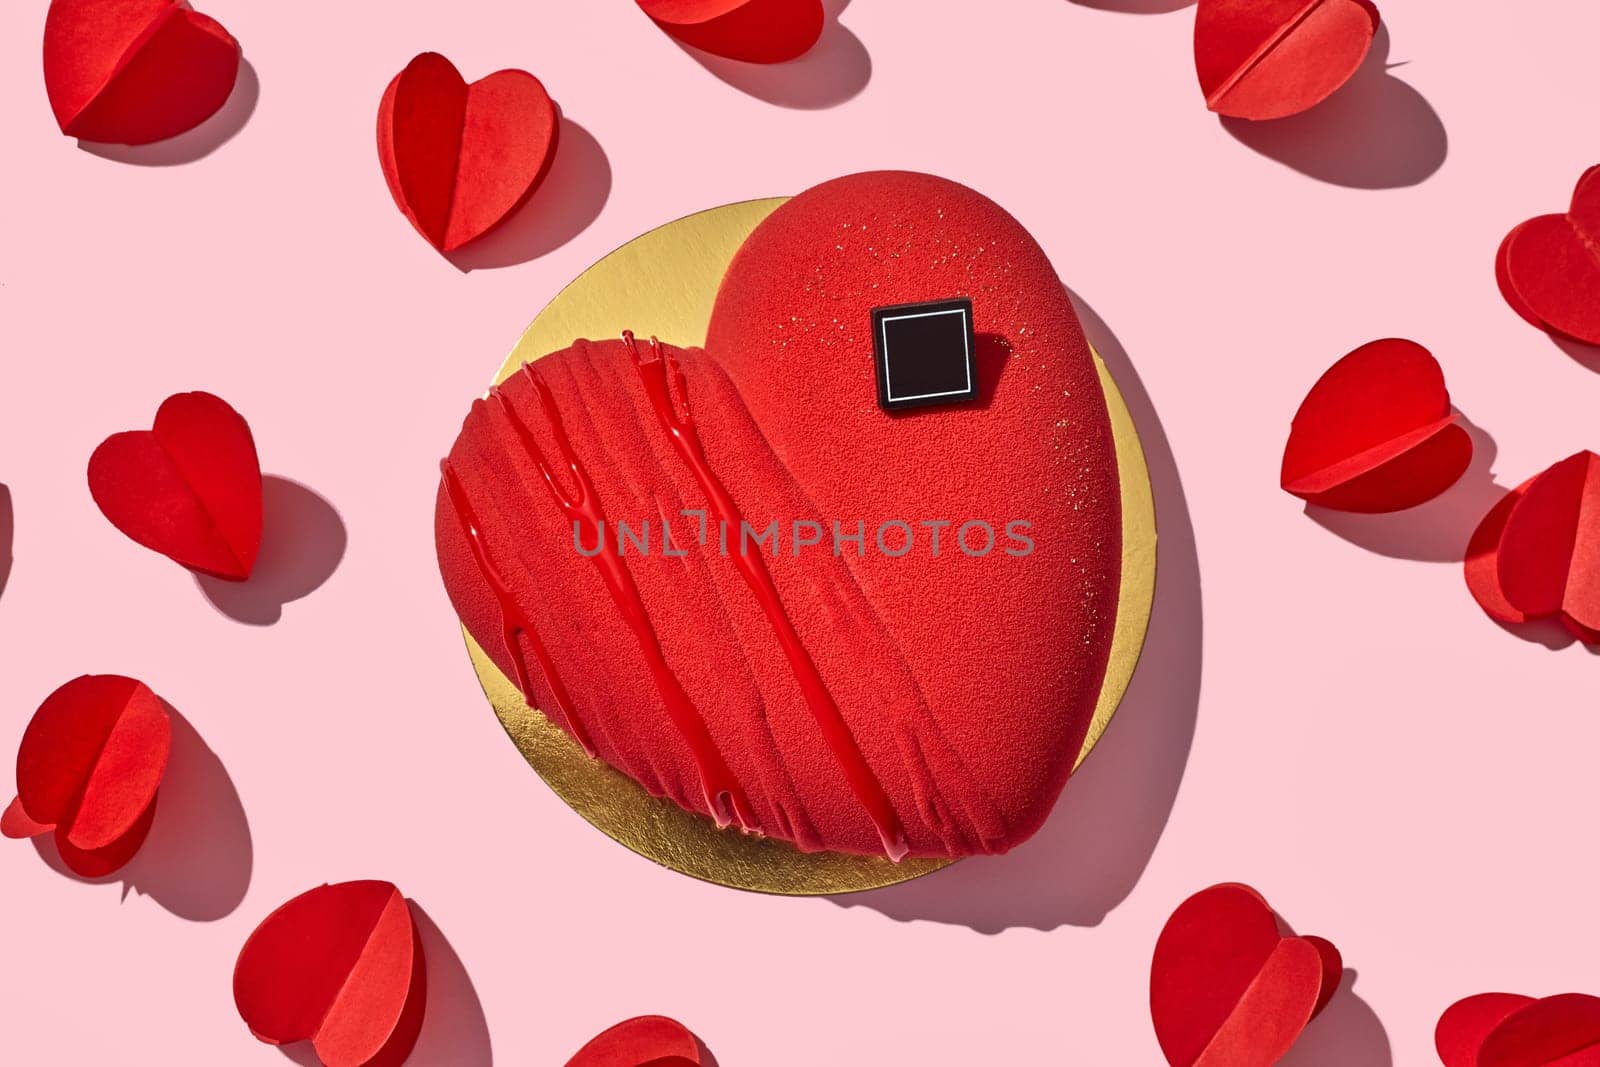 Vibrant heart-shaped red velvet cake on golden cardboard, surrounded by paper hearts on pastel pink background. Romantic dessert for declaration of love